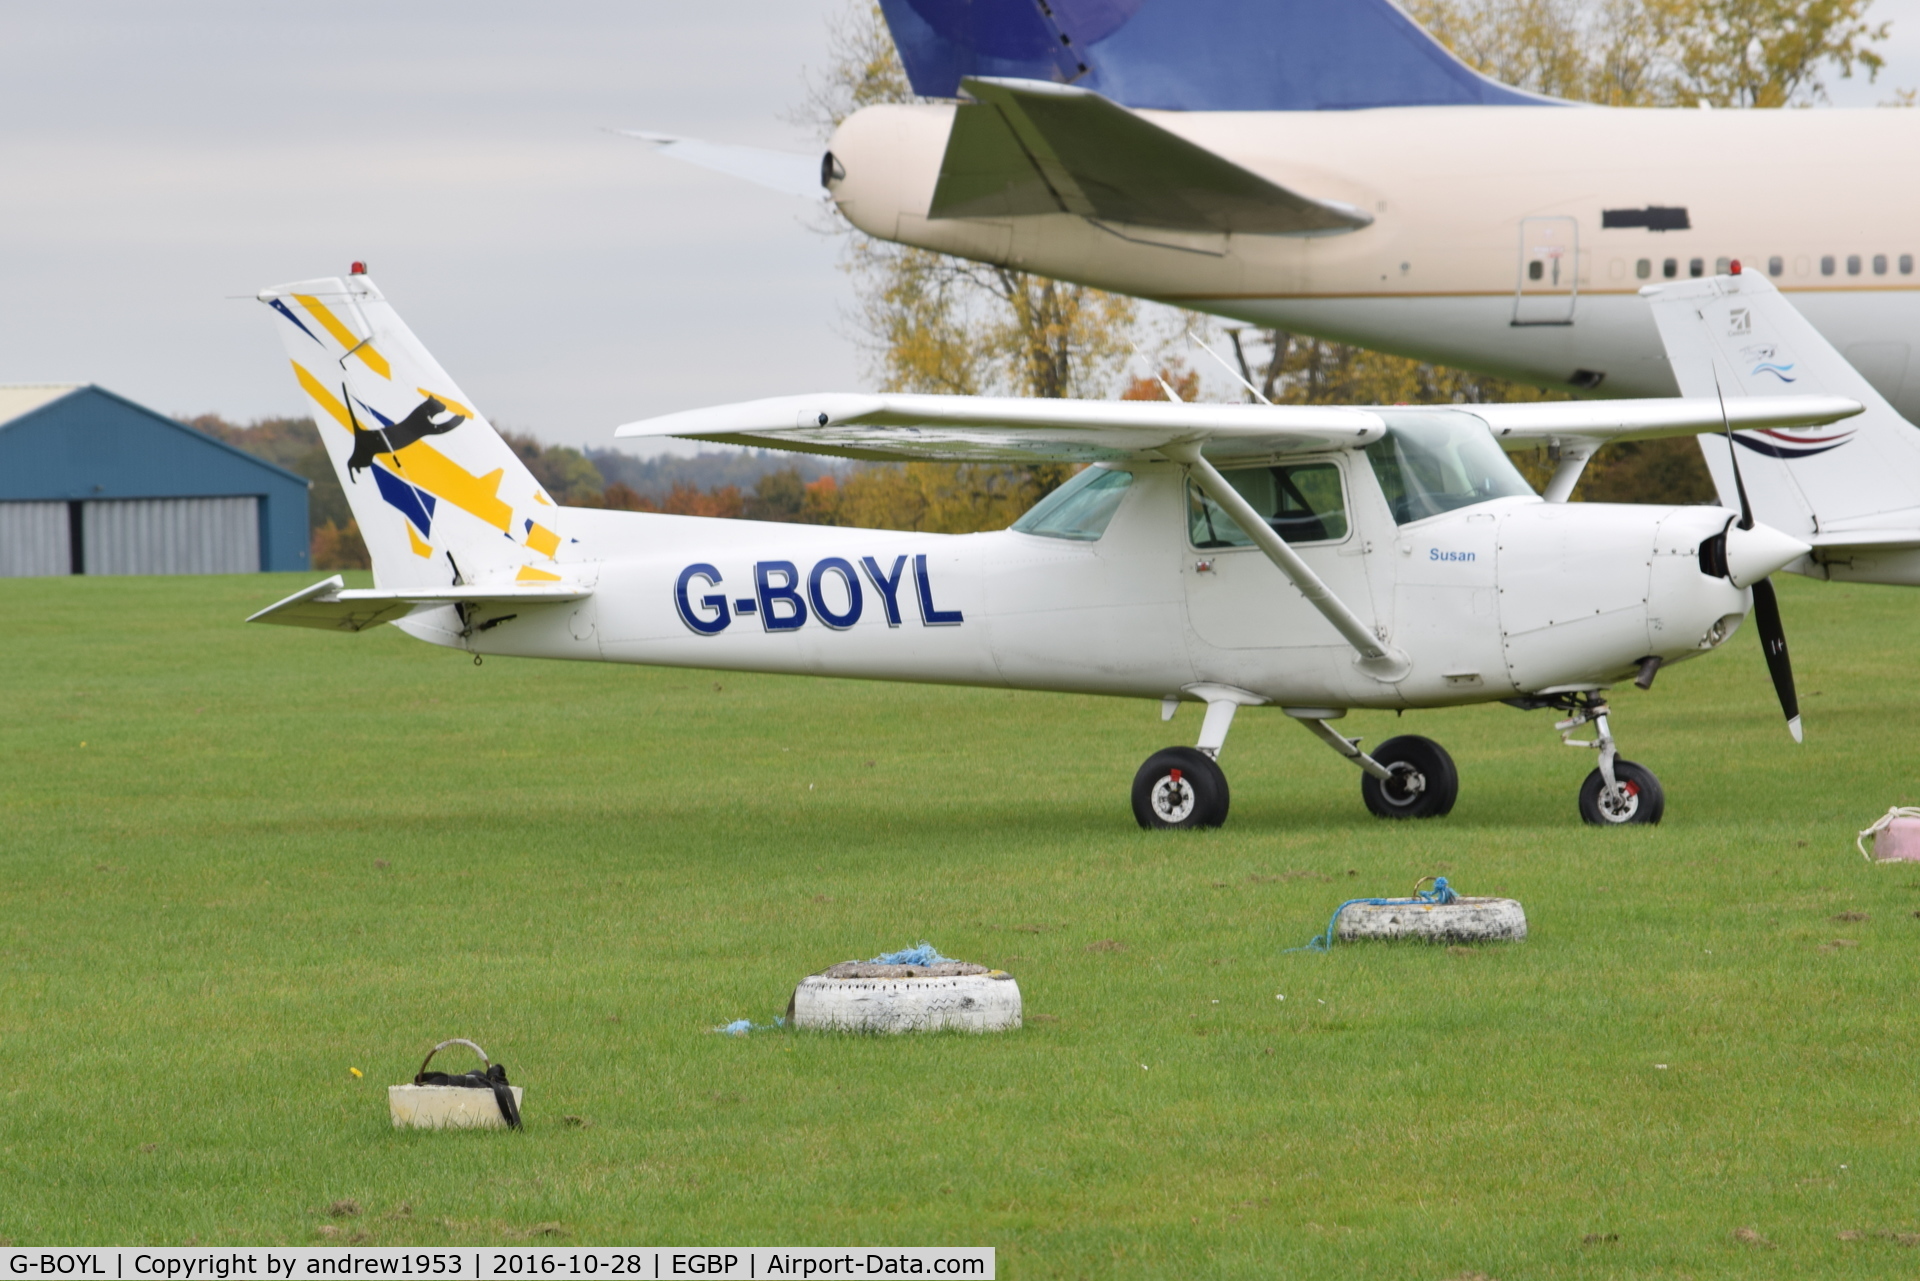 G-BOYL, 1980 Cessna 152 C/N 152-84379, G-BOYL at Cotswold Airport.